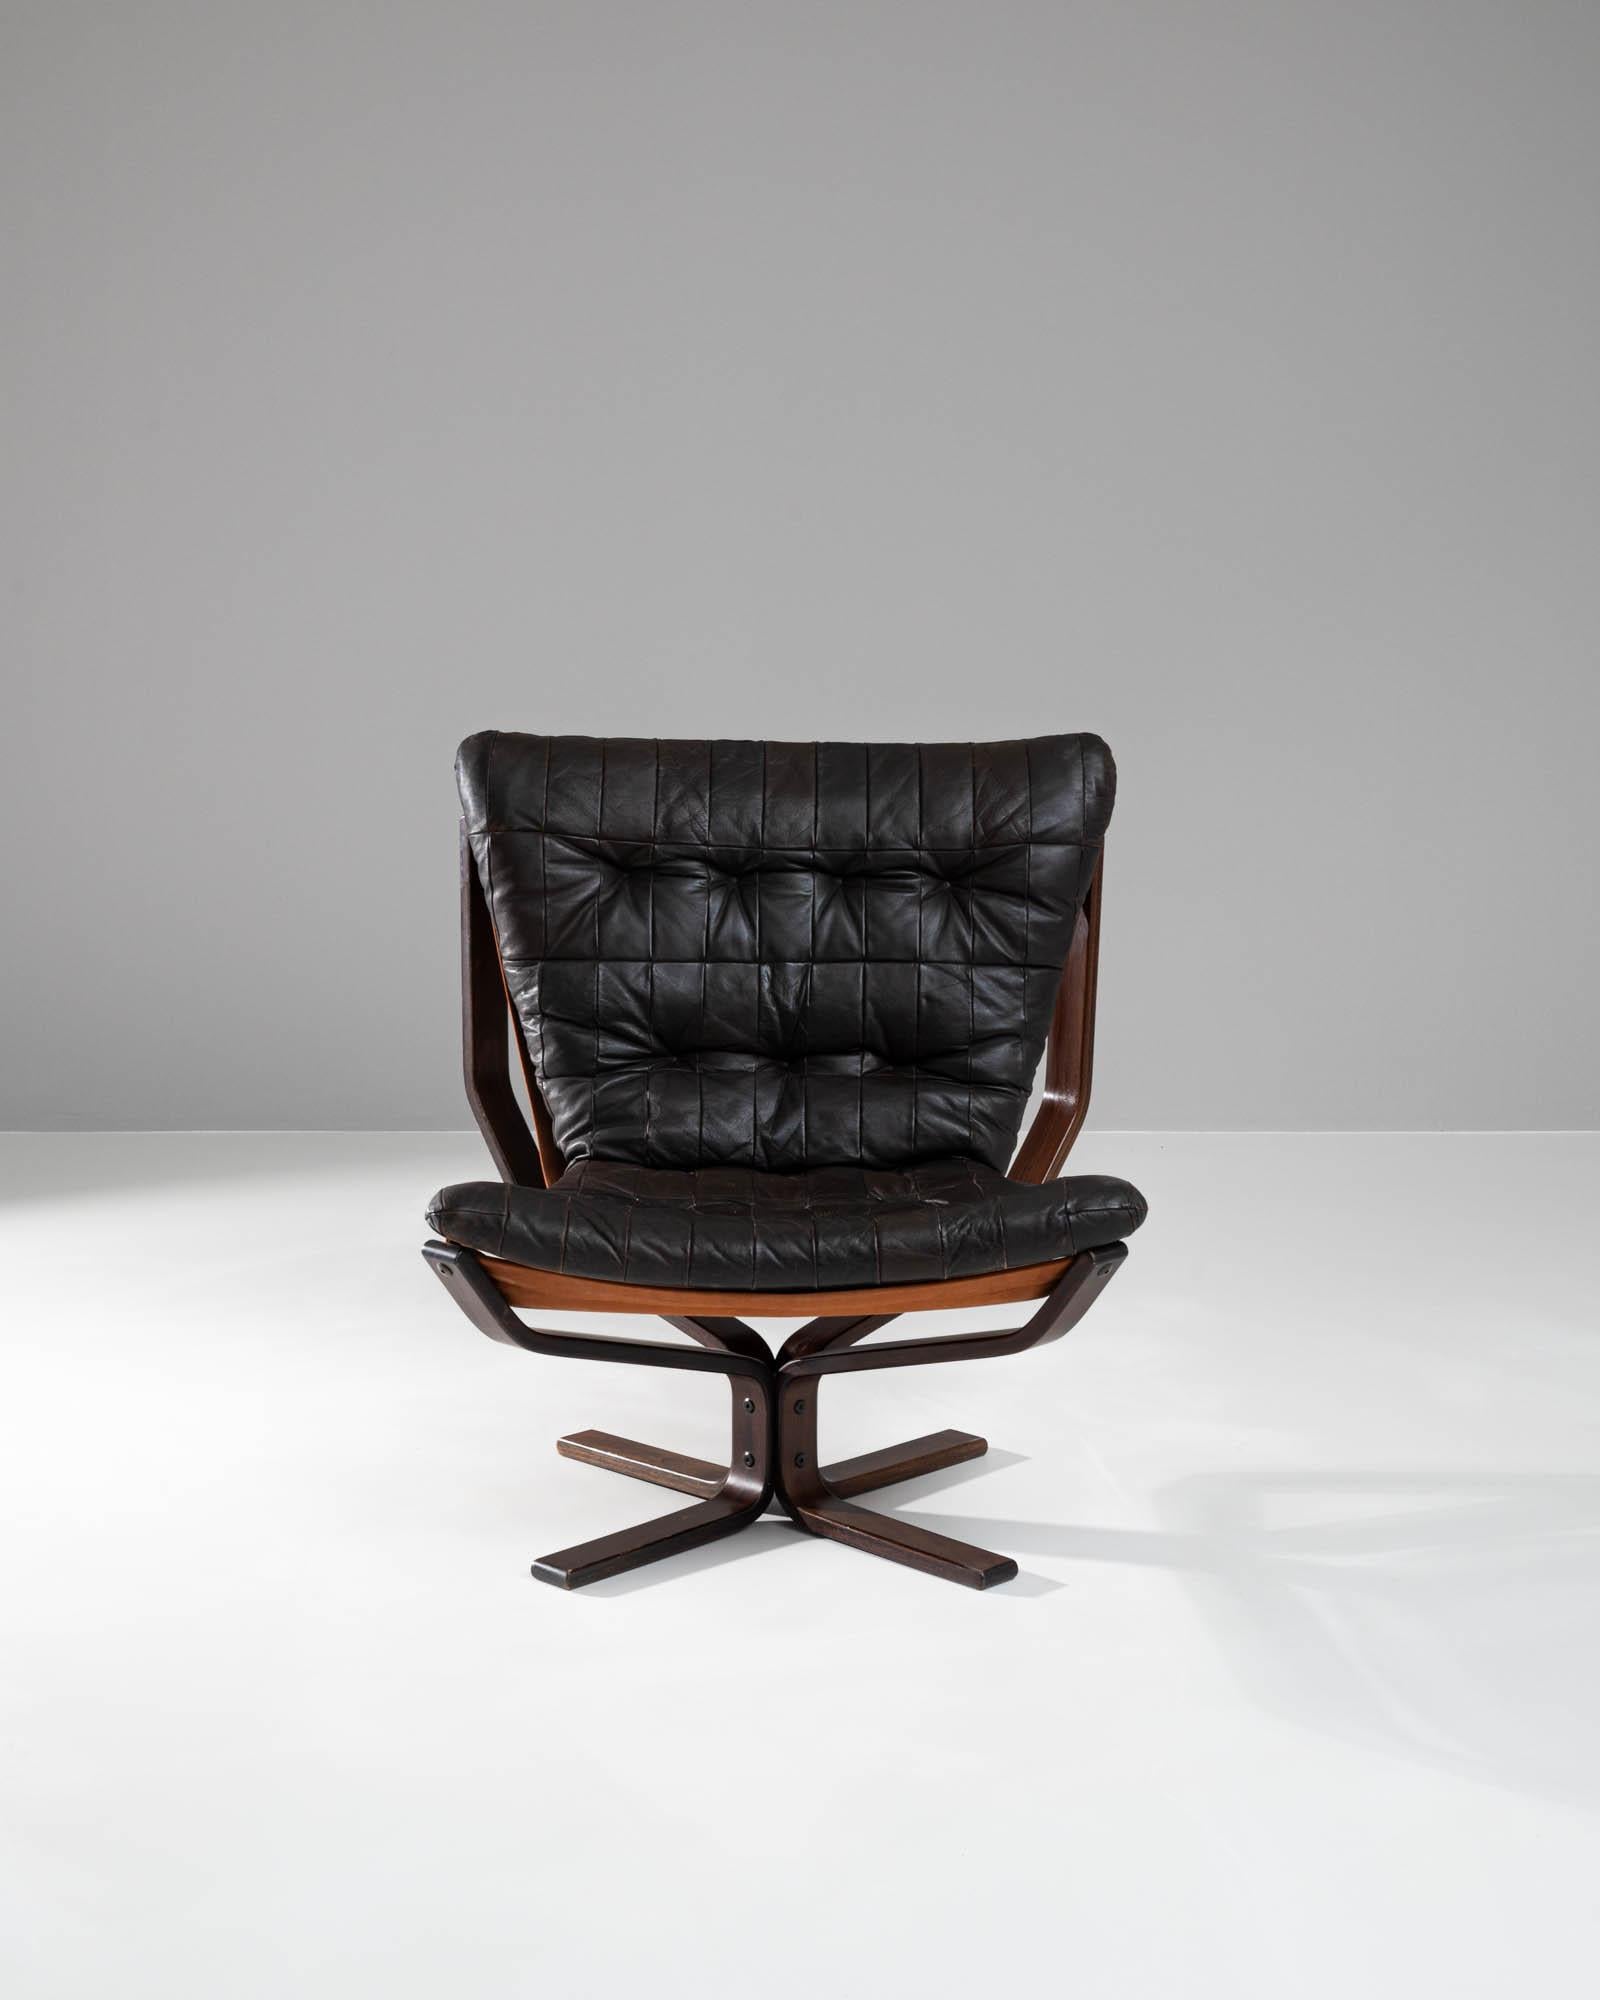 Discover a masterpiece of 20th-century design with this Danish Wooden & Leather Chair, a testament to timeless elegance and superior craftsmanship. This chair epitomizes comfort and style, featuring a sumptuously padded, tufted leather seat that